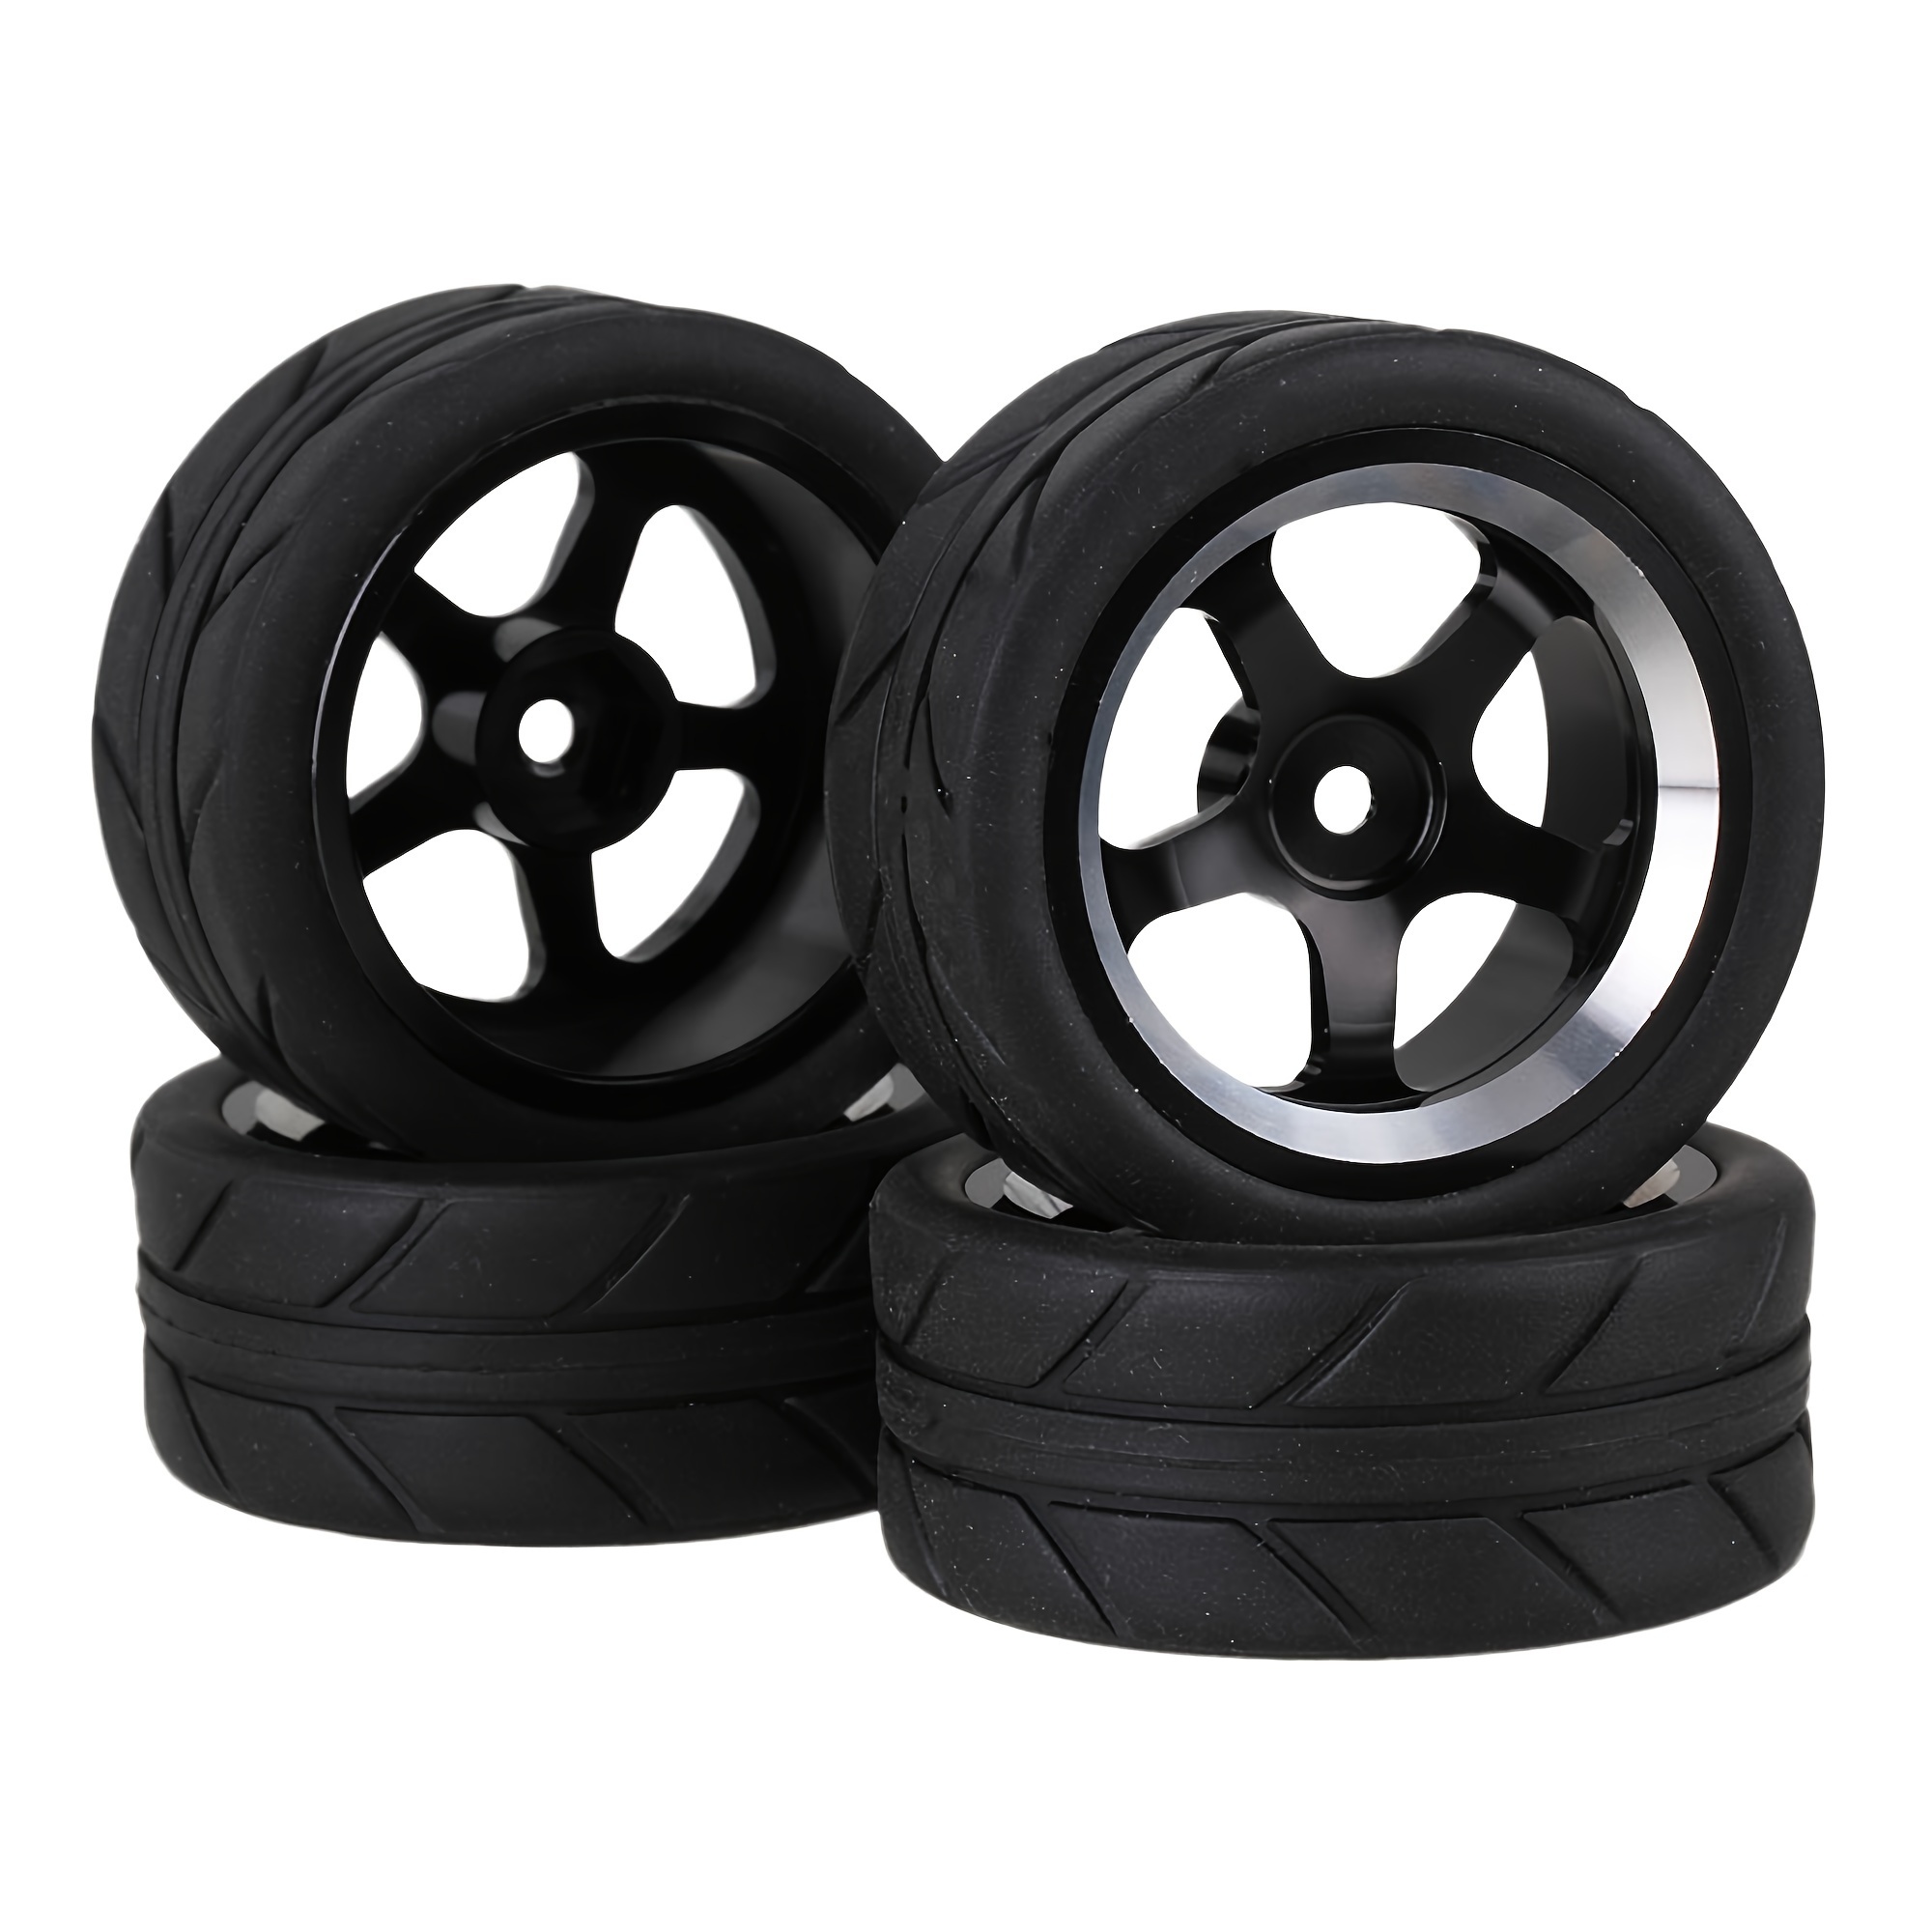 8.5X3.0 Electric Scooter Tire Explosion Proof Solid Tires Puncture  Resistant Tires for Different Road Conditions